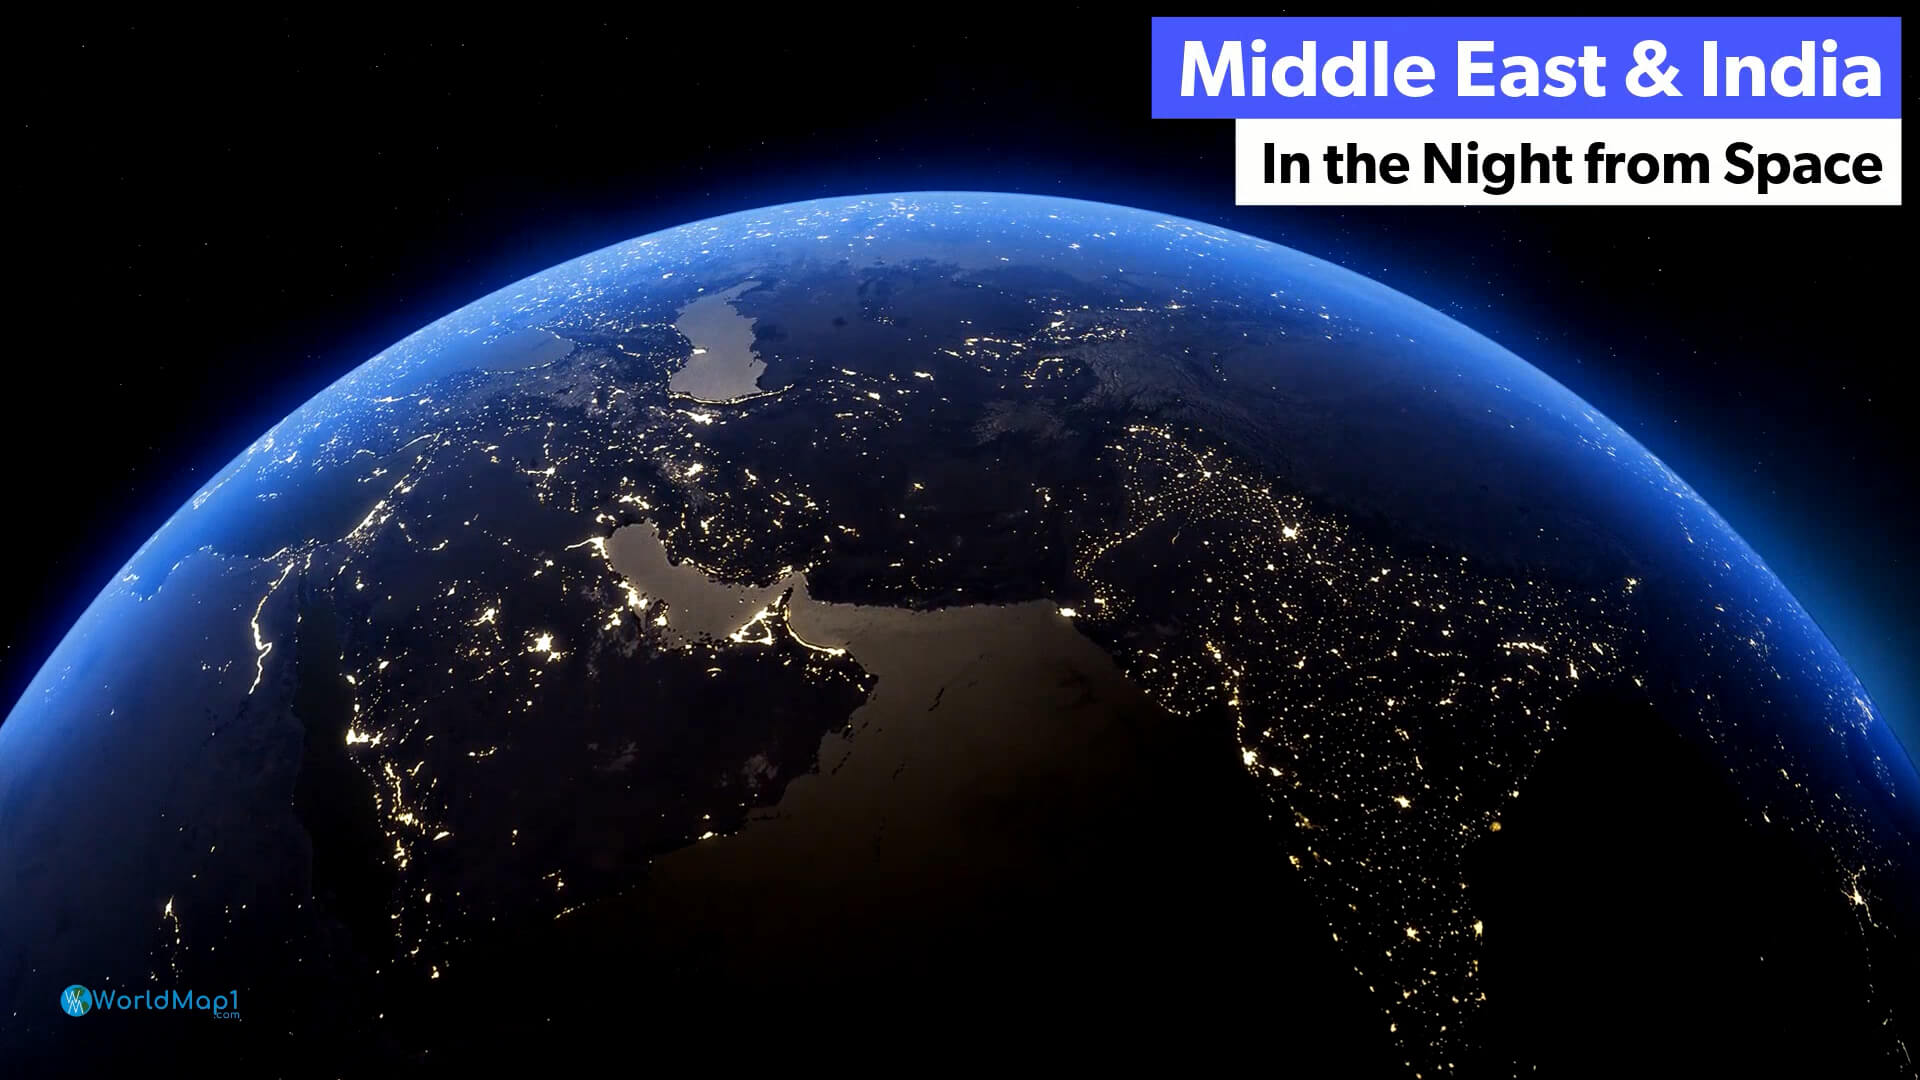 Middle East and India in the Night from Space